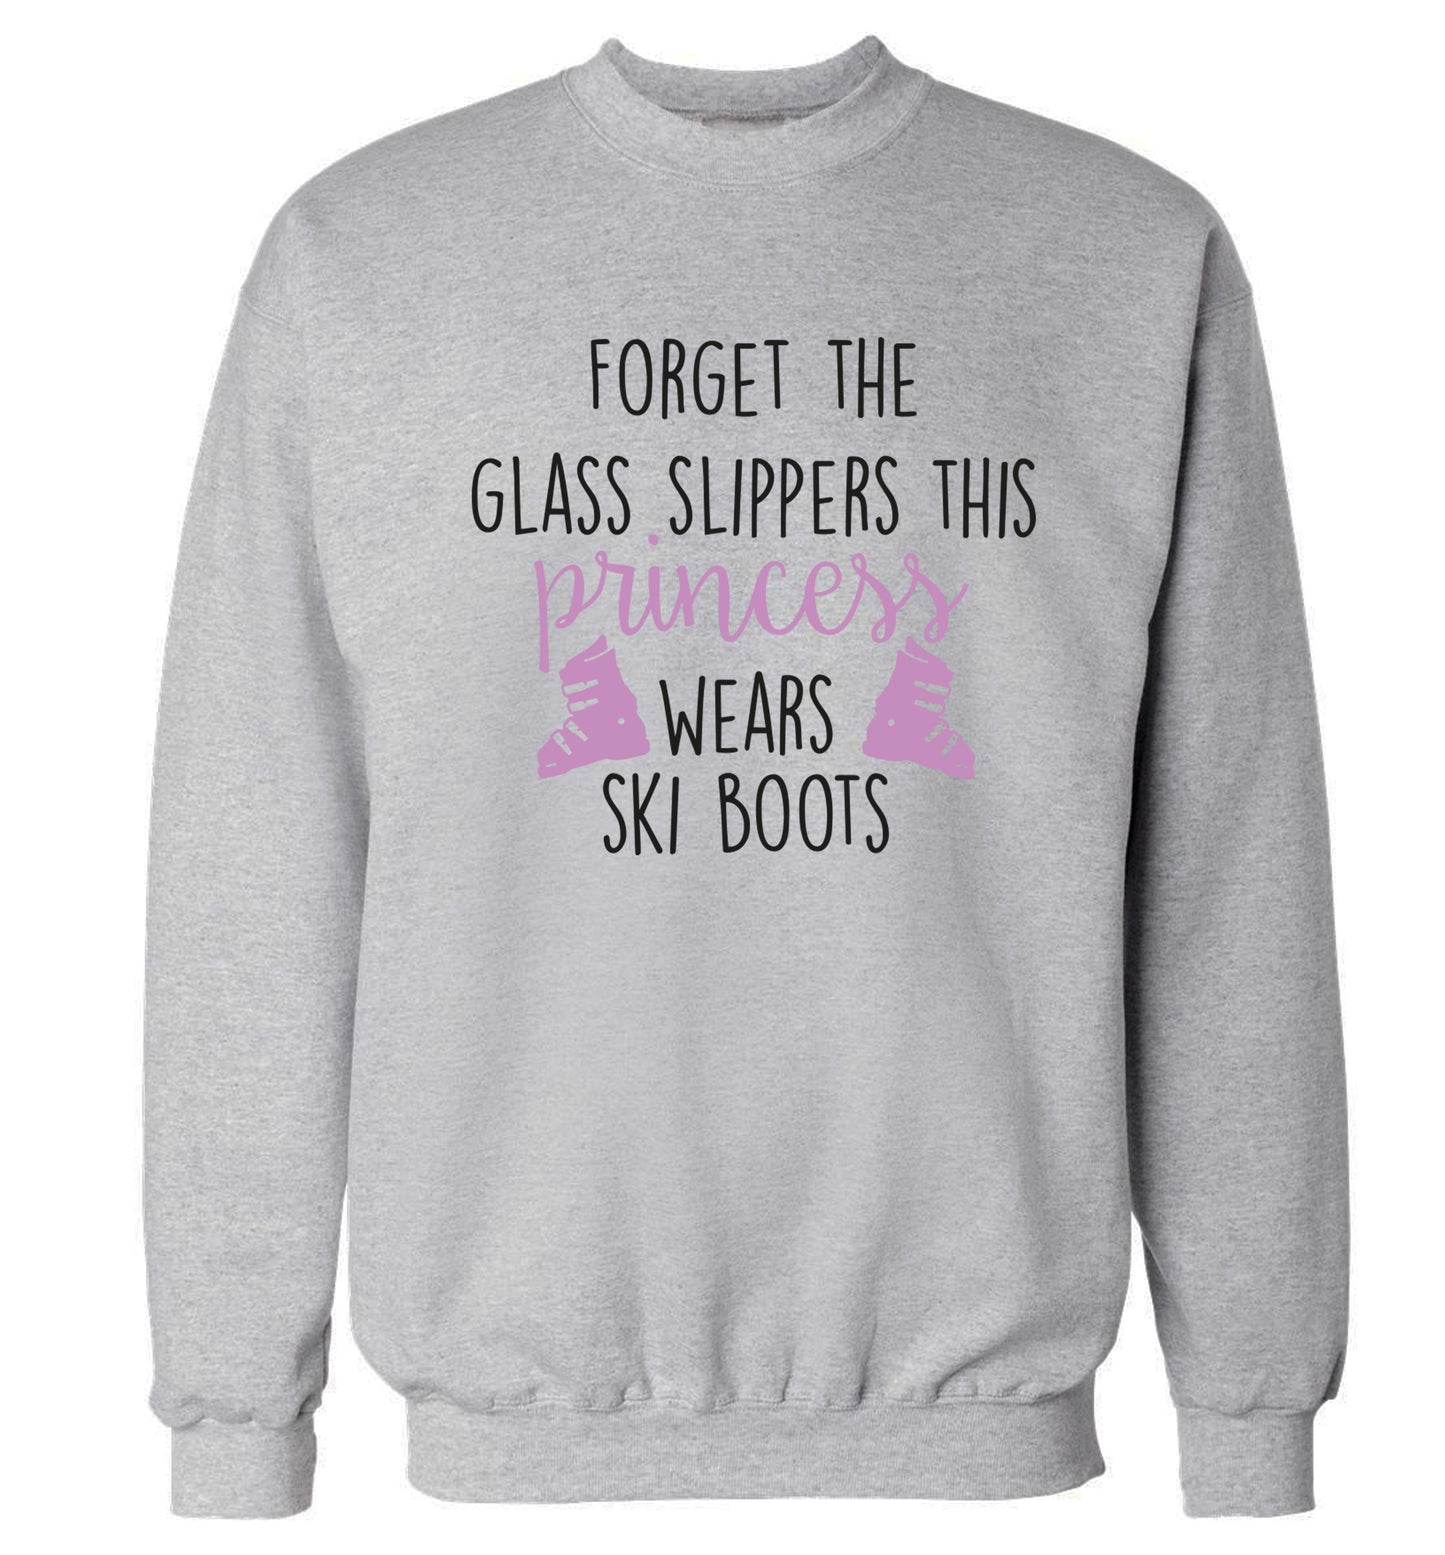 Forget the glass slippers this princess wears ski boots Adult's unisex grey Sweater 2XL